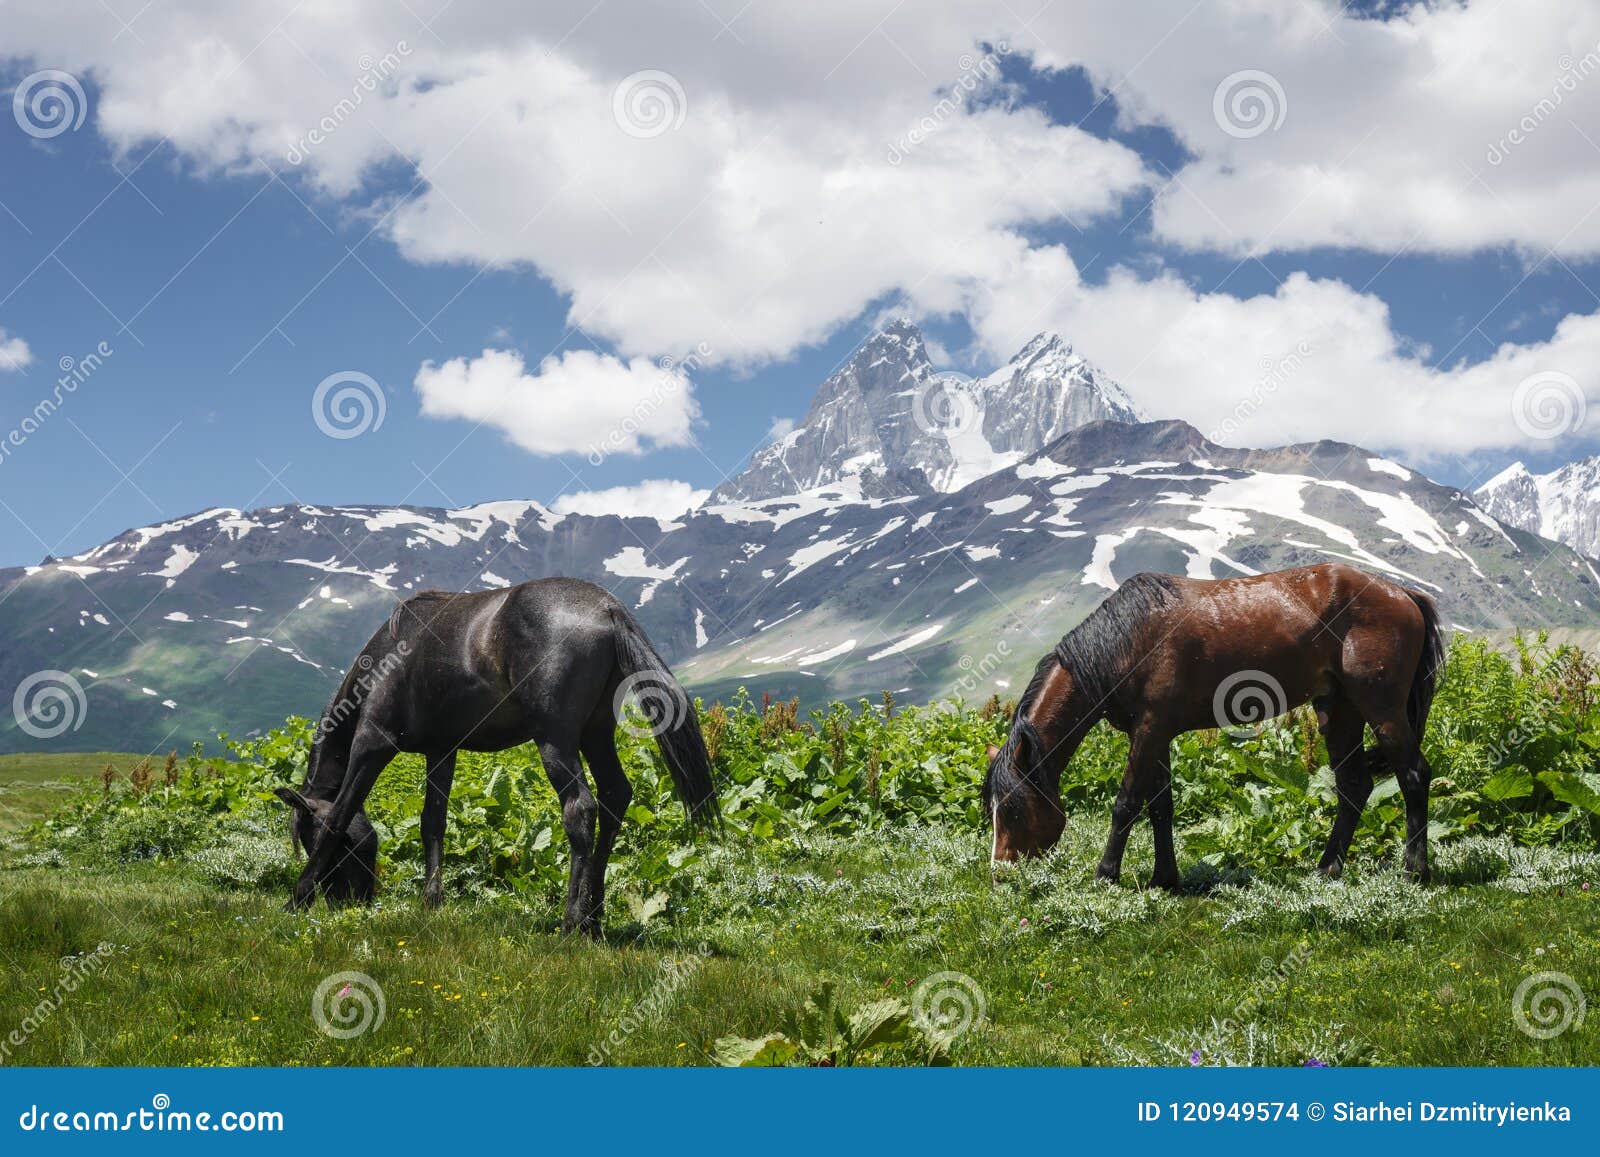 horses graze on green meadow in mountains against backdrop of mount ushba in svaneti, georgia. horses eat grass on mountain meadow